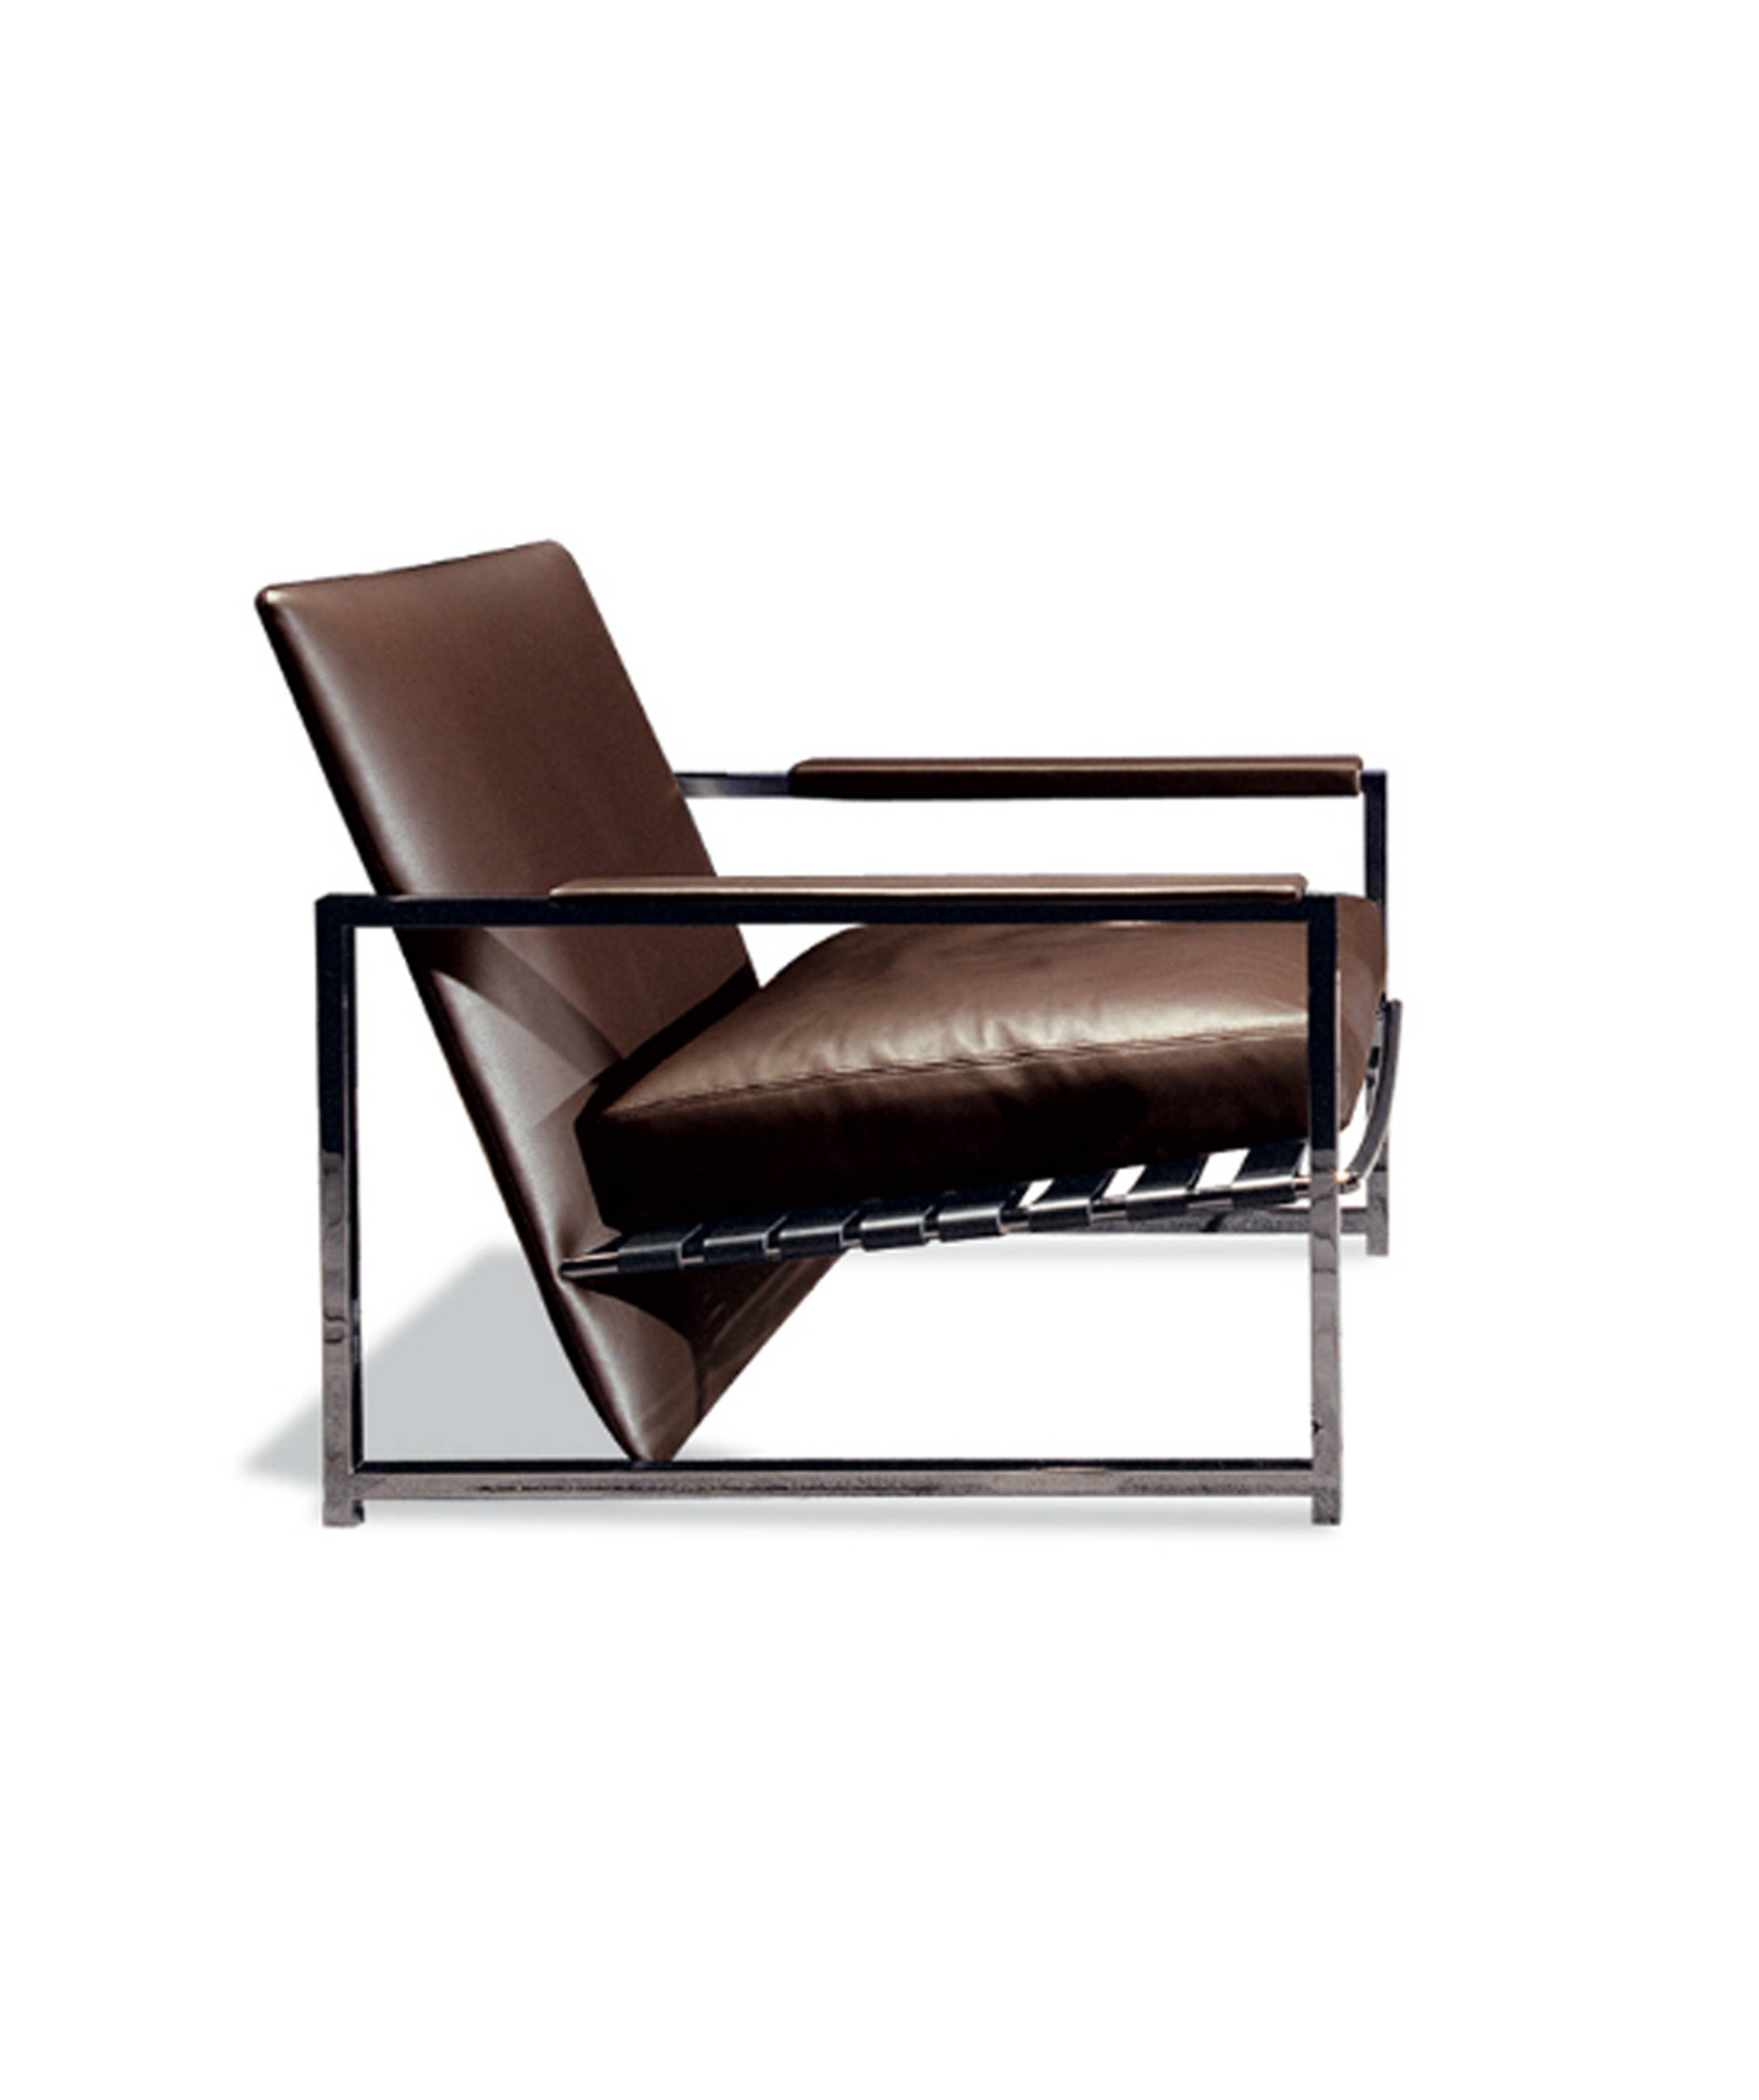 Minotti – Sfc&g September 2015 Pertaining To Compact Armchairs (View 17 of 30)